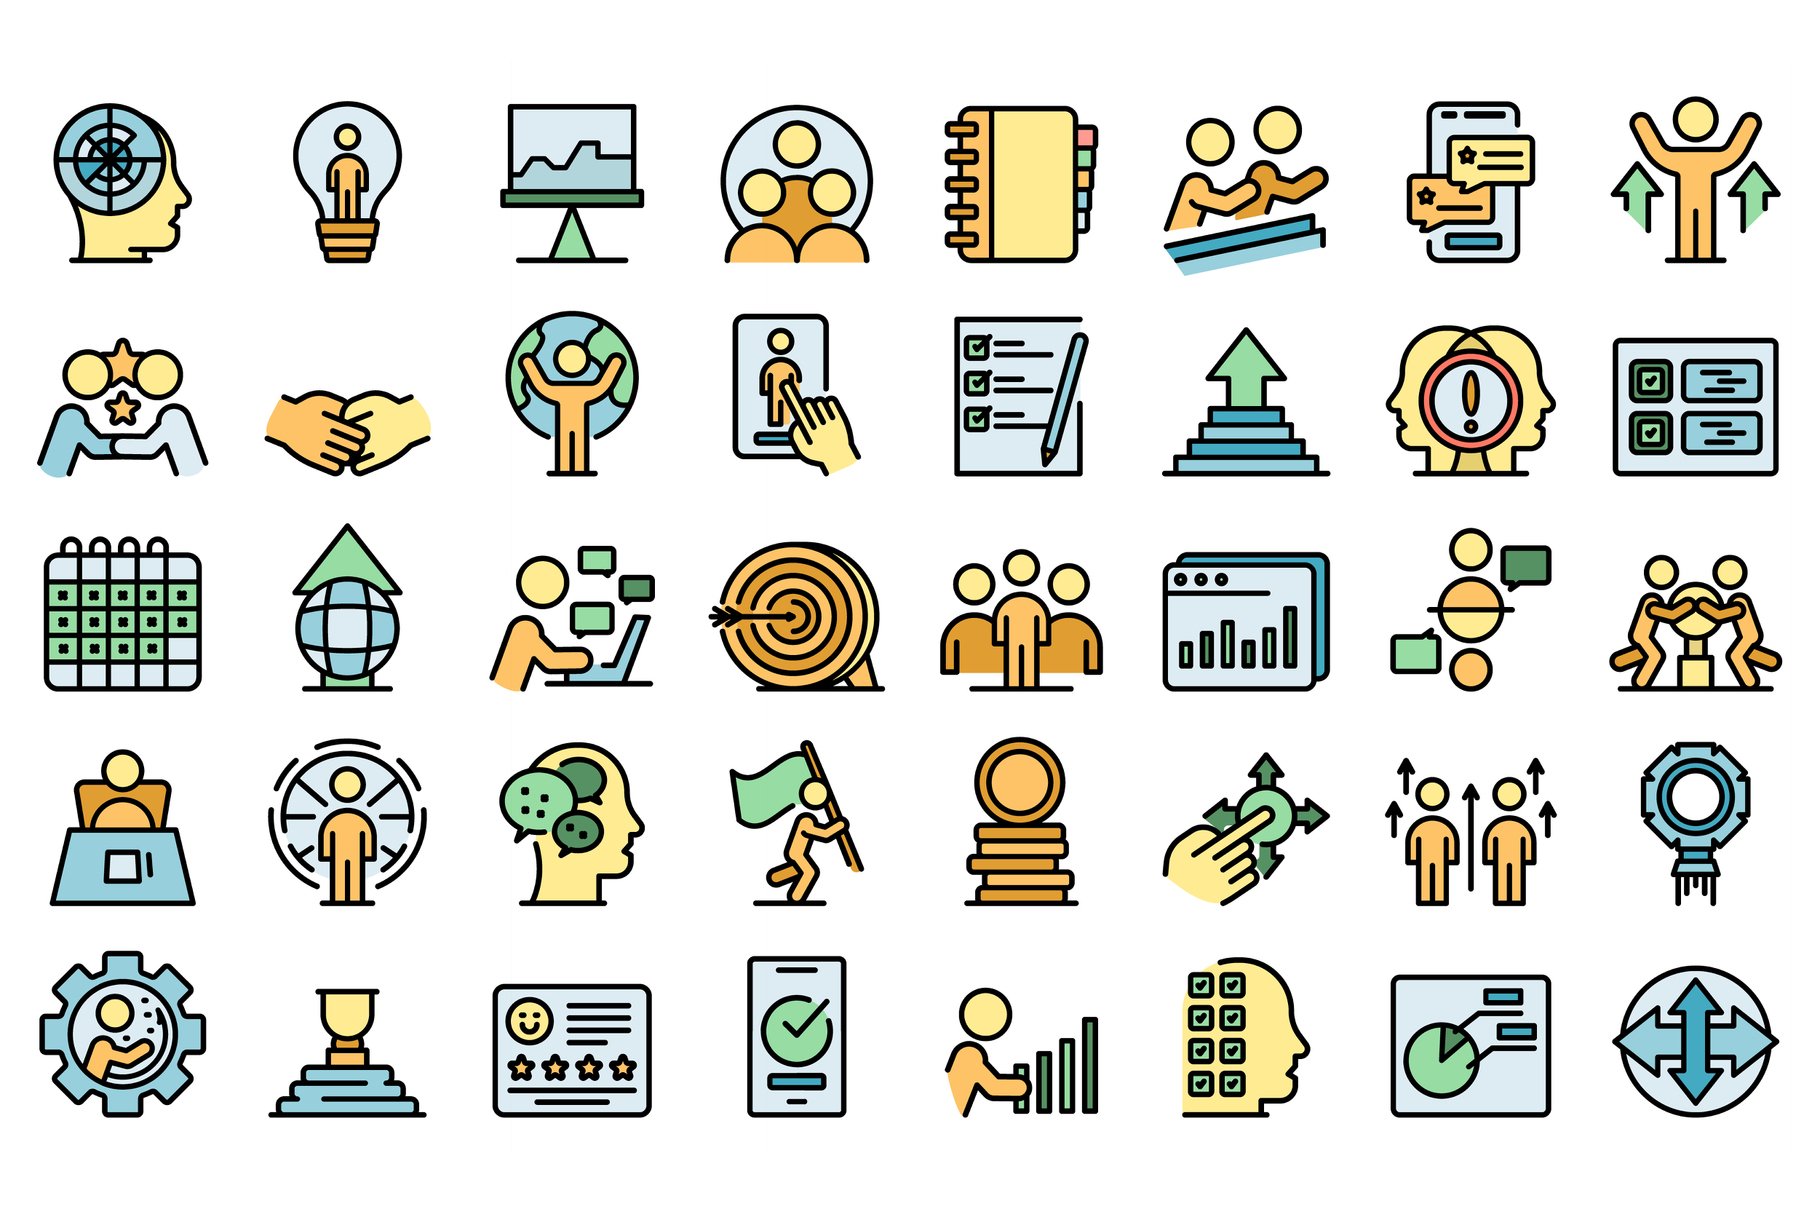 Human resources icons set line color cover image.